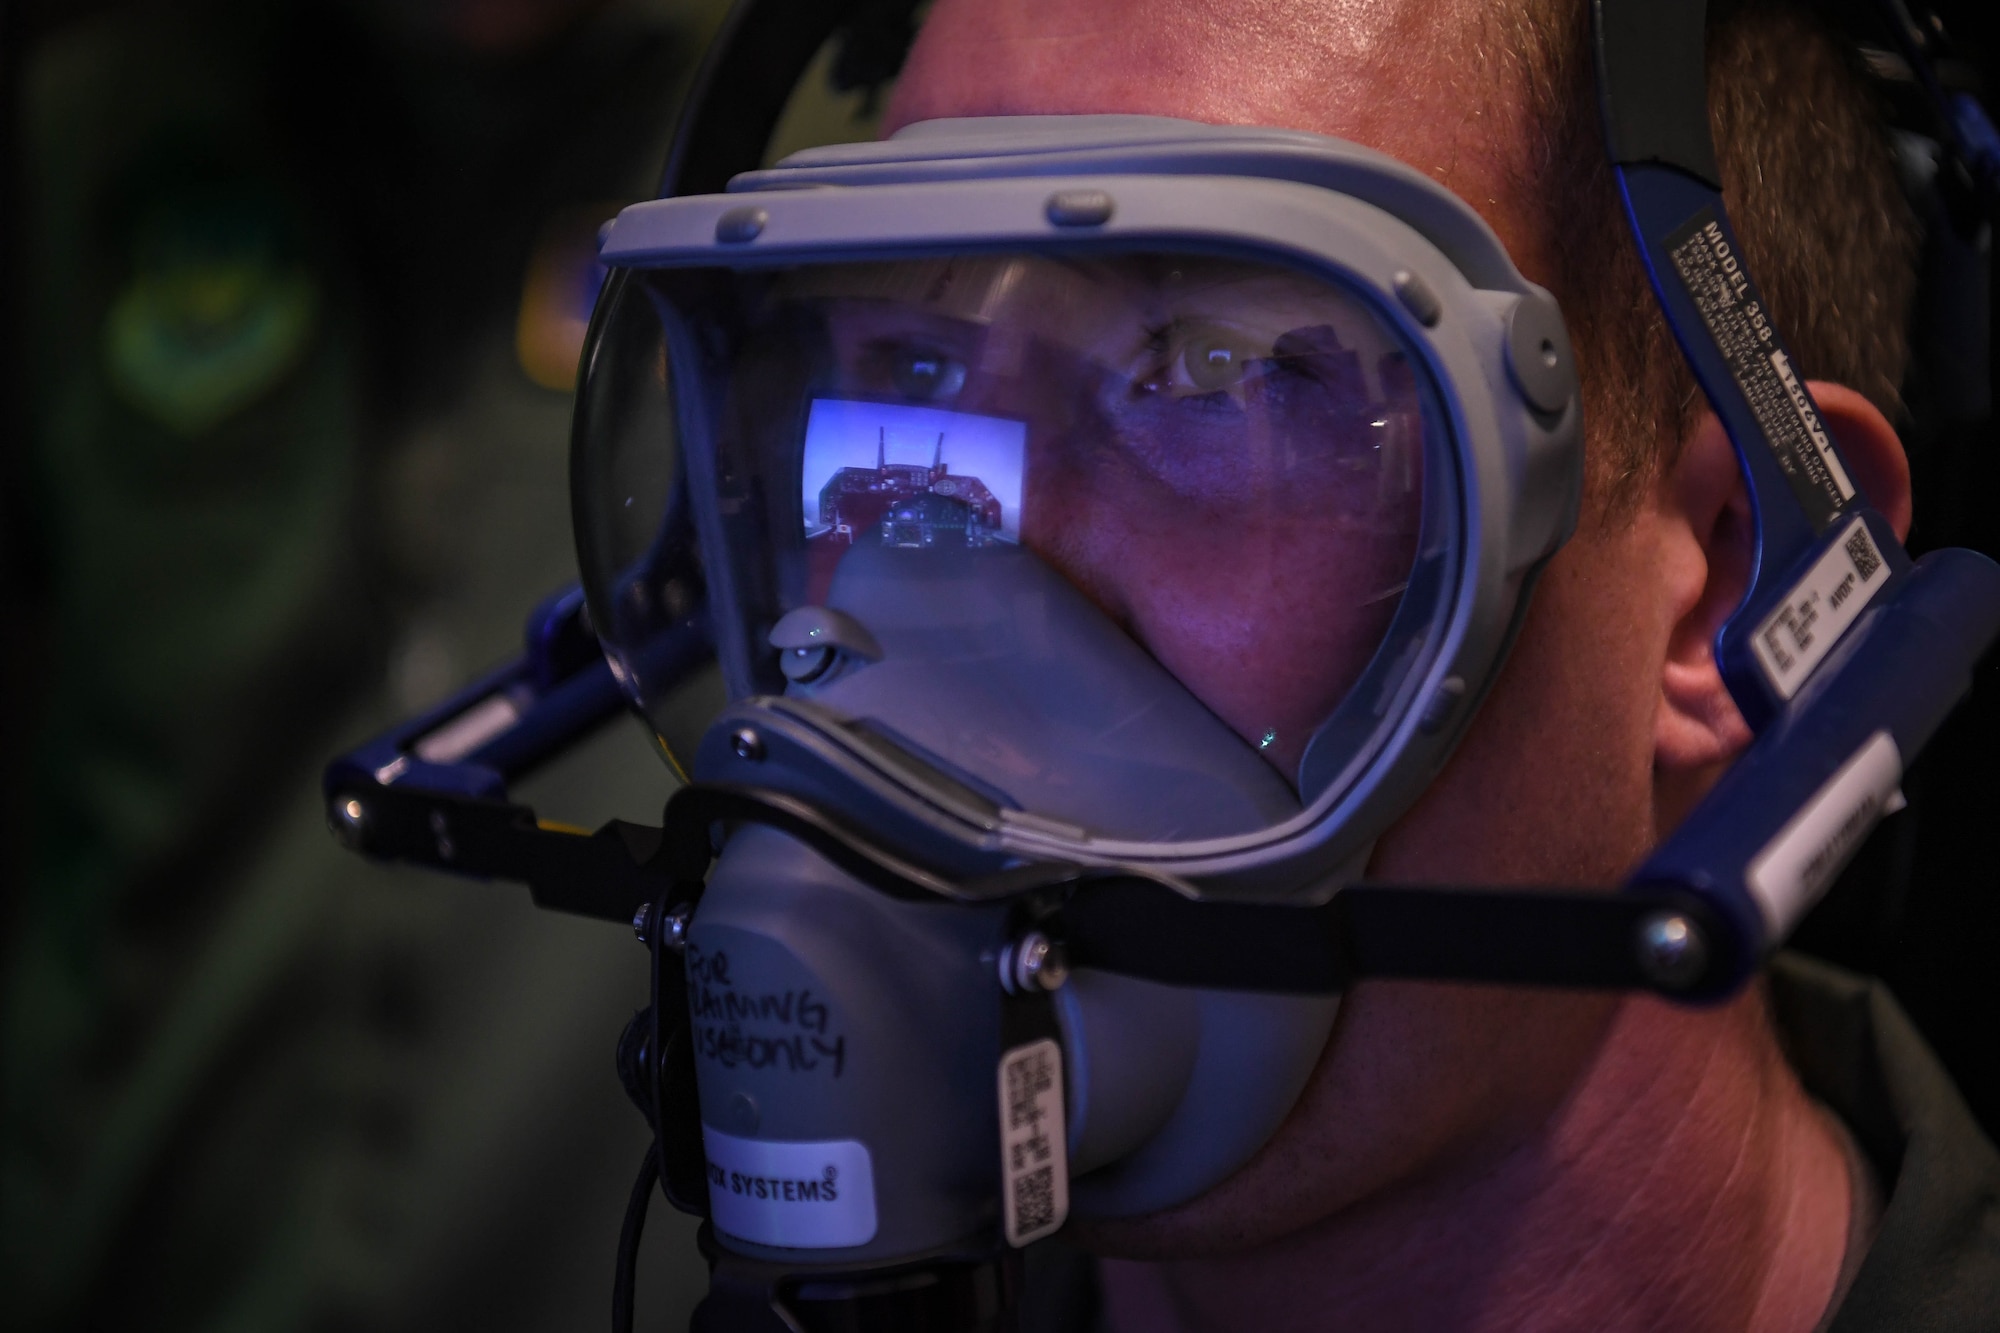 U.S. Air Force Maj. Frank Adamik, 76th Airlift Squadron pilot, undergoes physiological refresher training at Ramstein Air Base, Germany, Jan. 27, 2022. The hypoxia familiarization training puts pilots through a simulated flying experience in an unpressurized environment, restricting the amount of oxygen in the cabin. This training allows pilots to become familiar with hypoxia symptoms and emergency procedures that allow them to continue flying the aircraft under these circumstances. (U.S. Air Force photo by Airman 1st Class Jared Lovett)